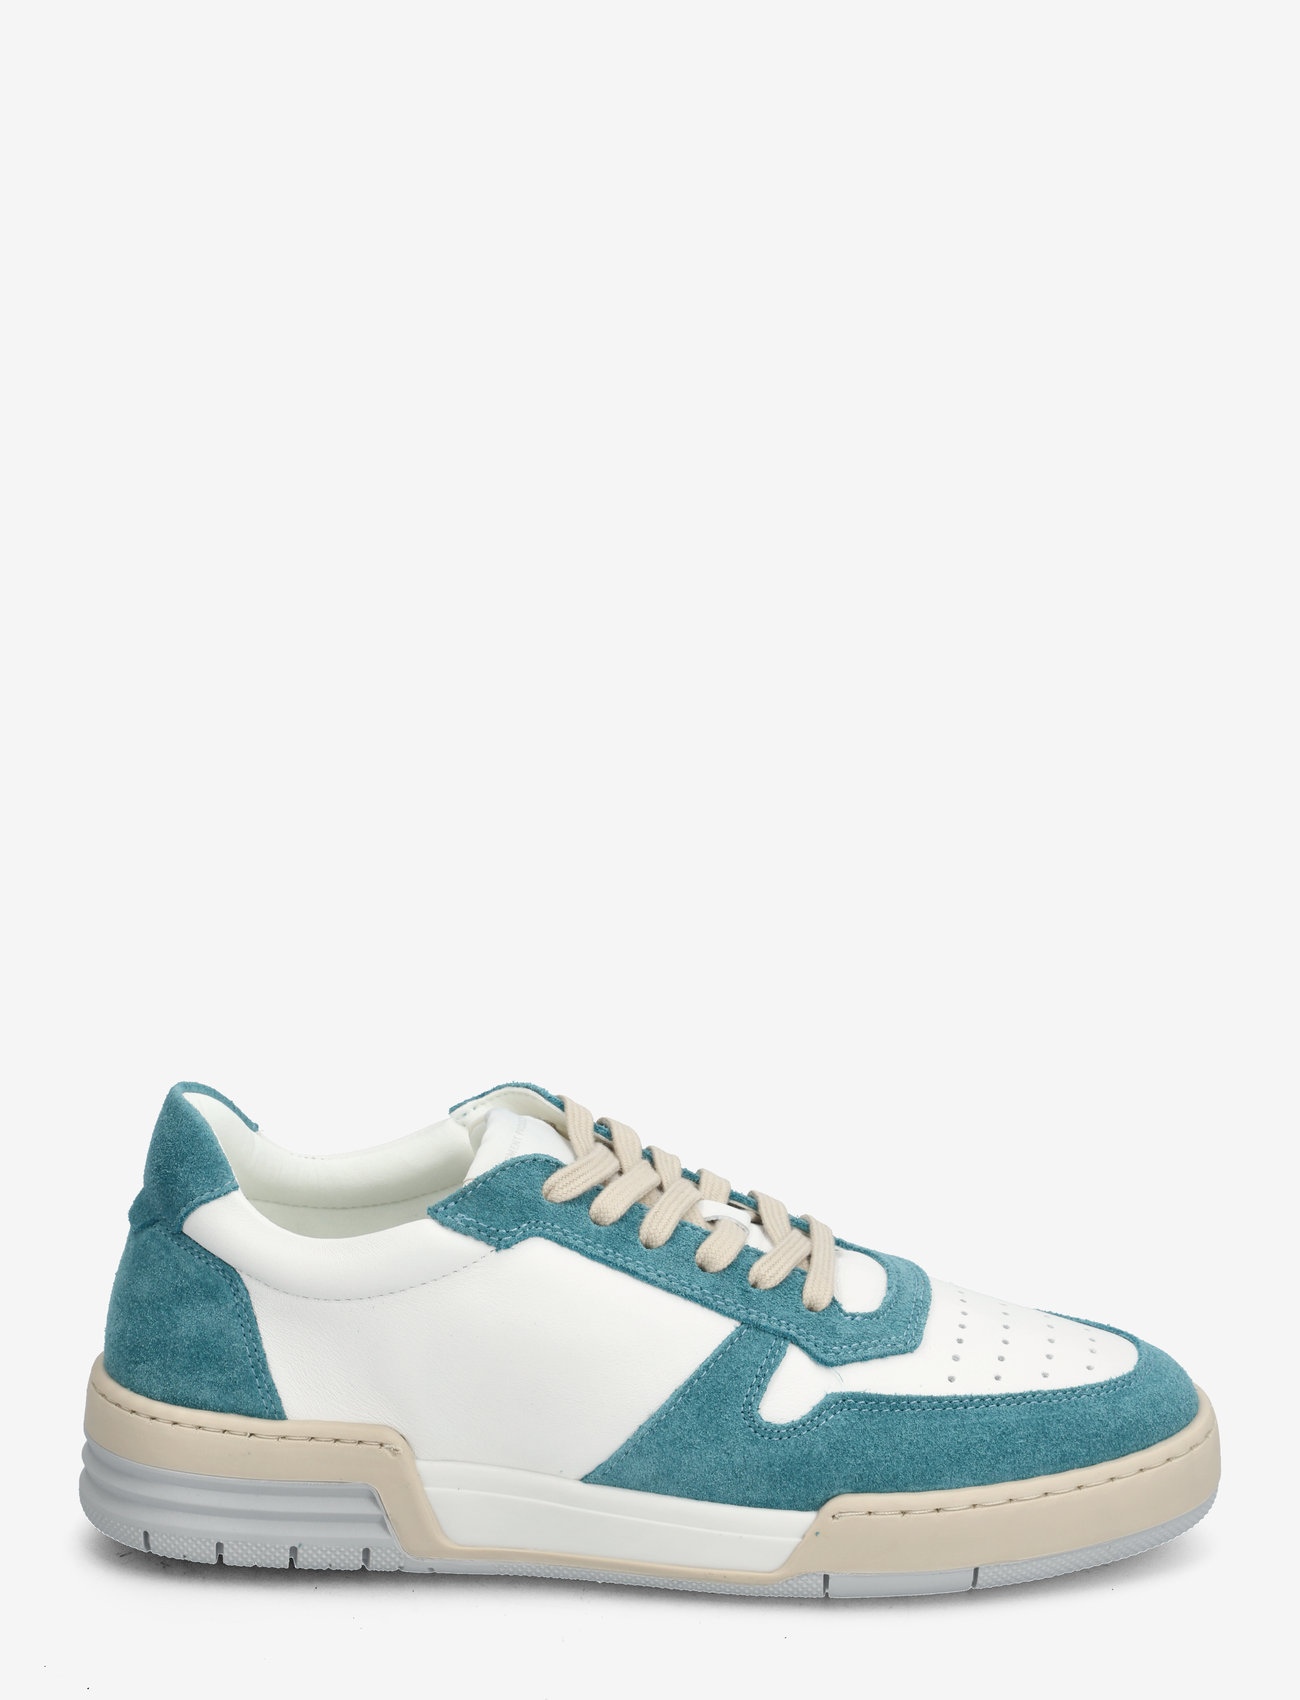 Garment Project - Legacy 80s - Petrol Leather Suede - low tops - petrol - 1